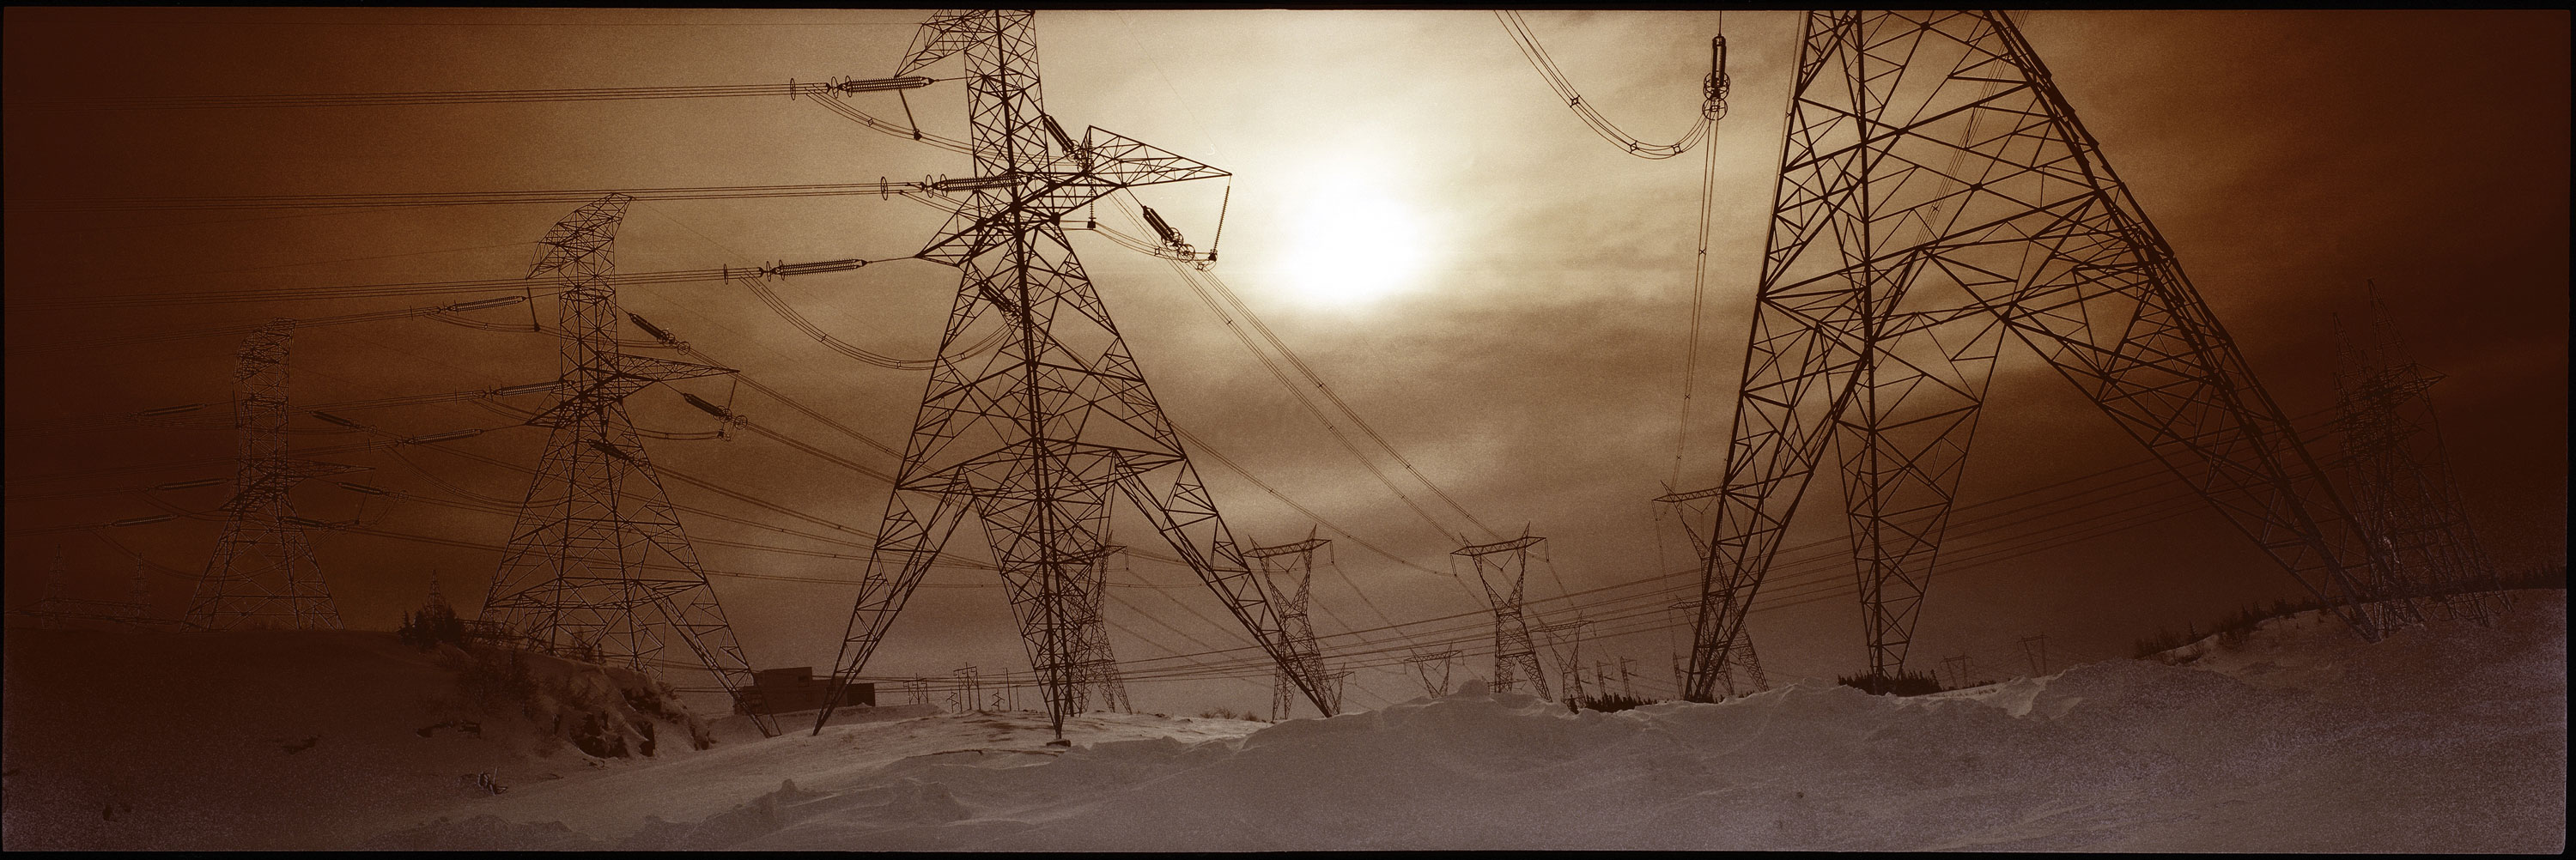 image of an electric power transmission line